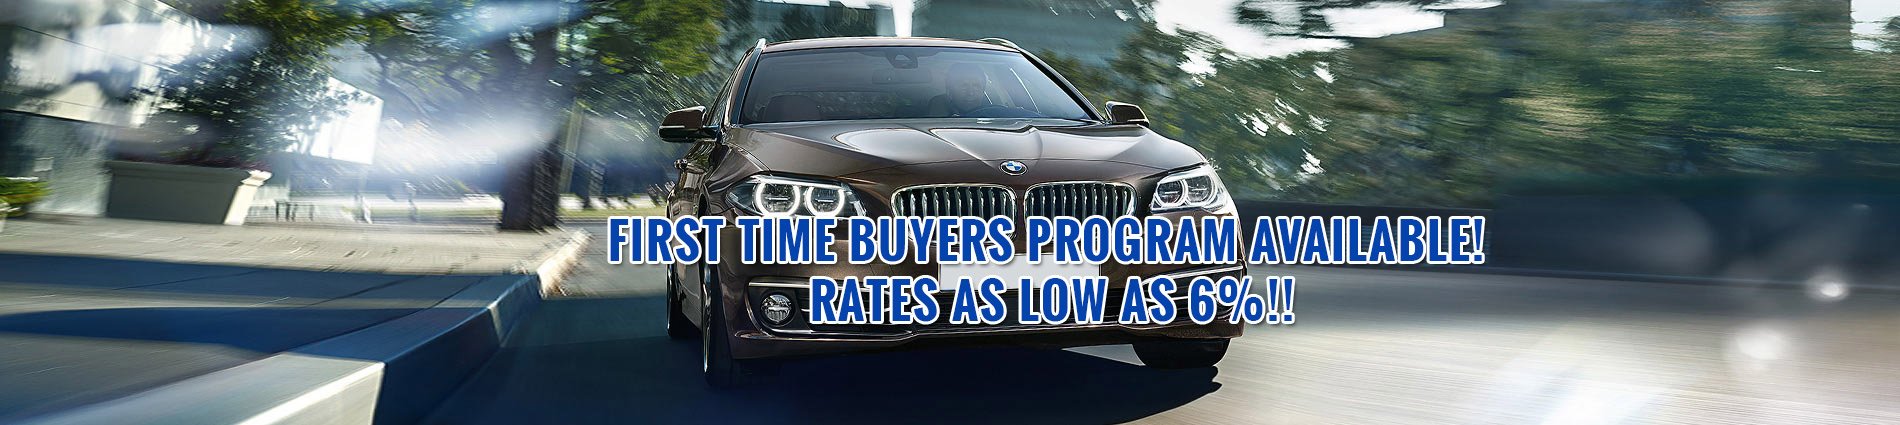 First time buyers program available! Rates as low as 6%!!